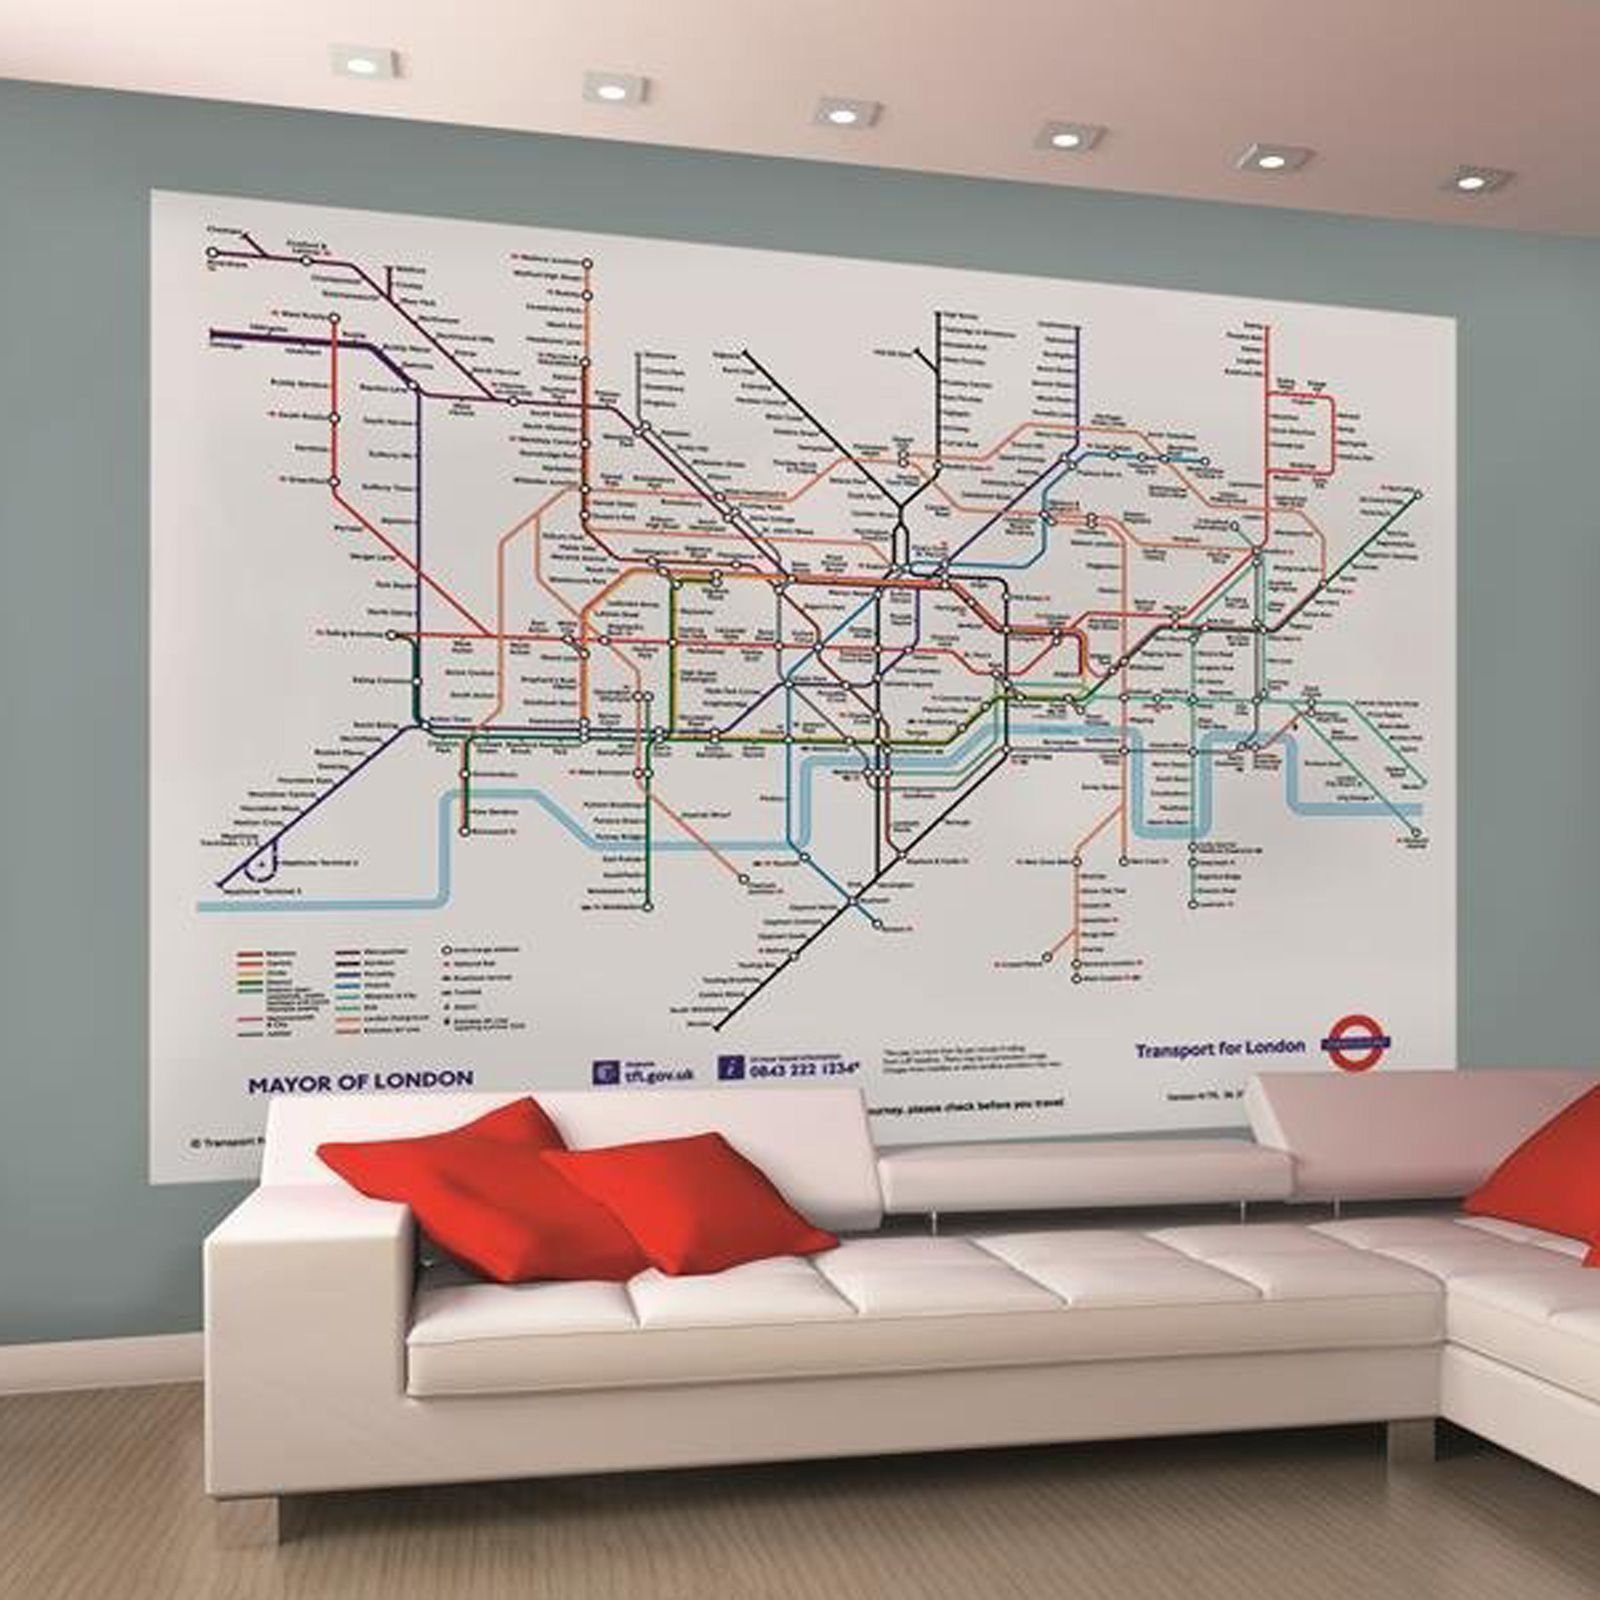 🔥 Download Details About London Underground Tube Map Wallpaper Wall